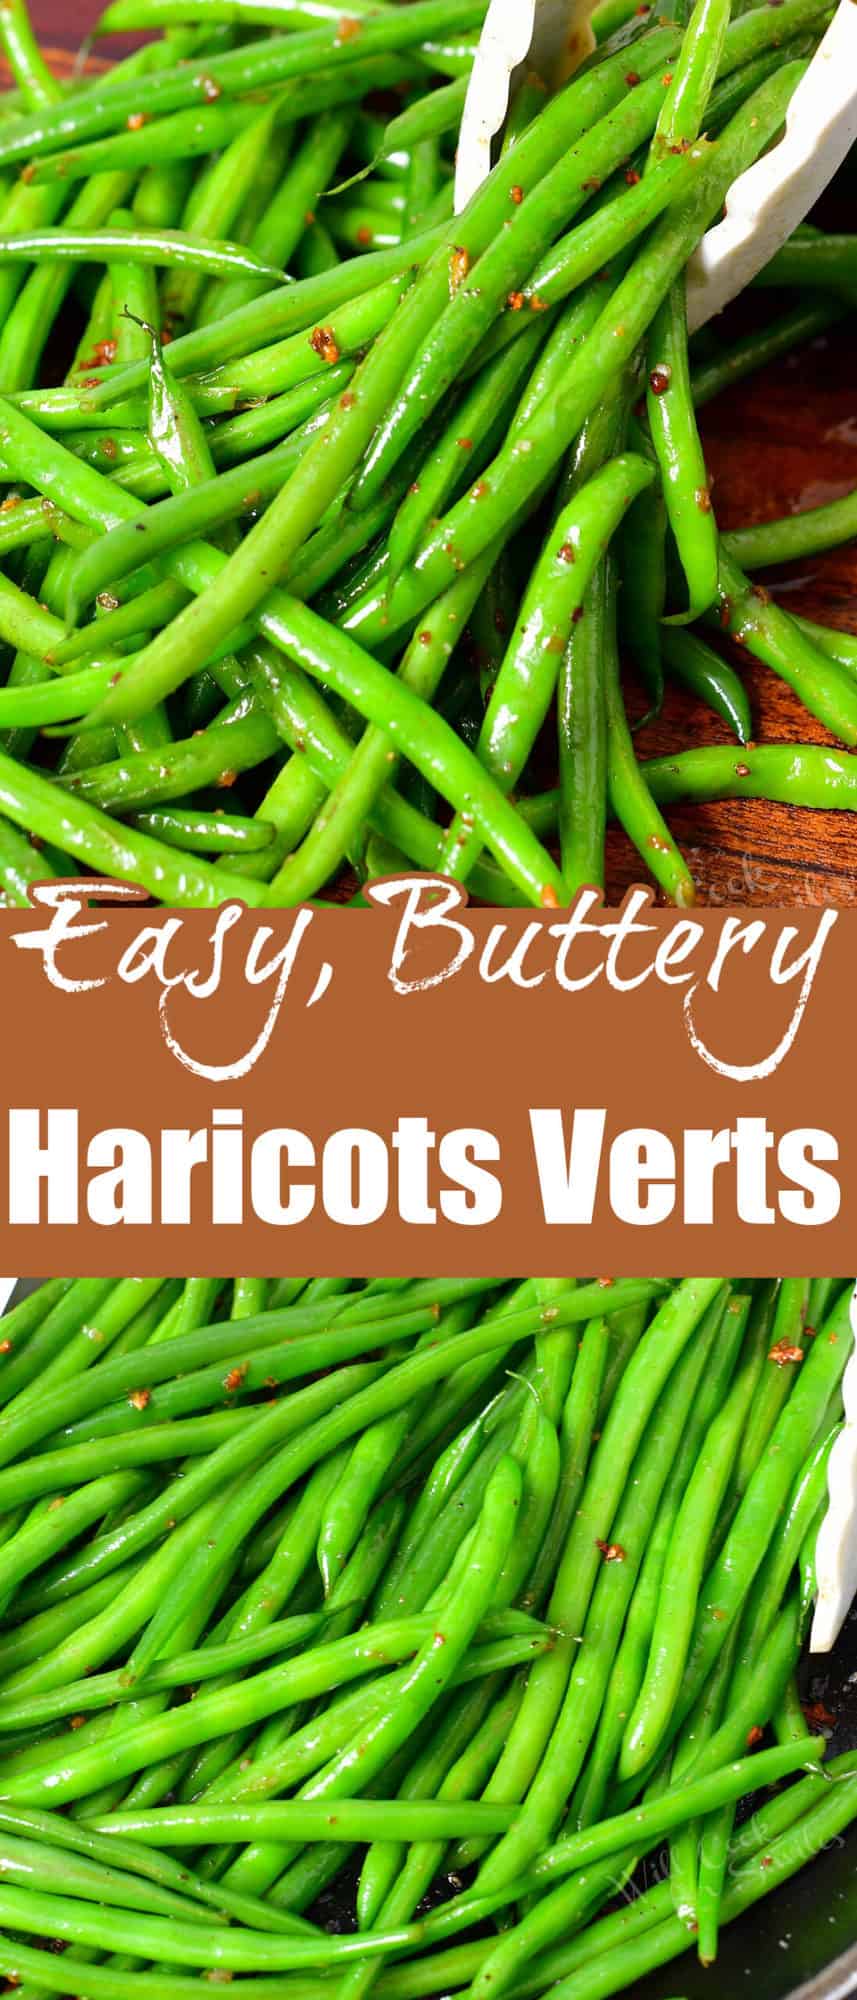 collage of two images of haricots verts close up